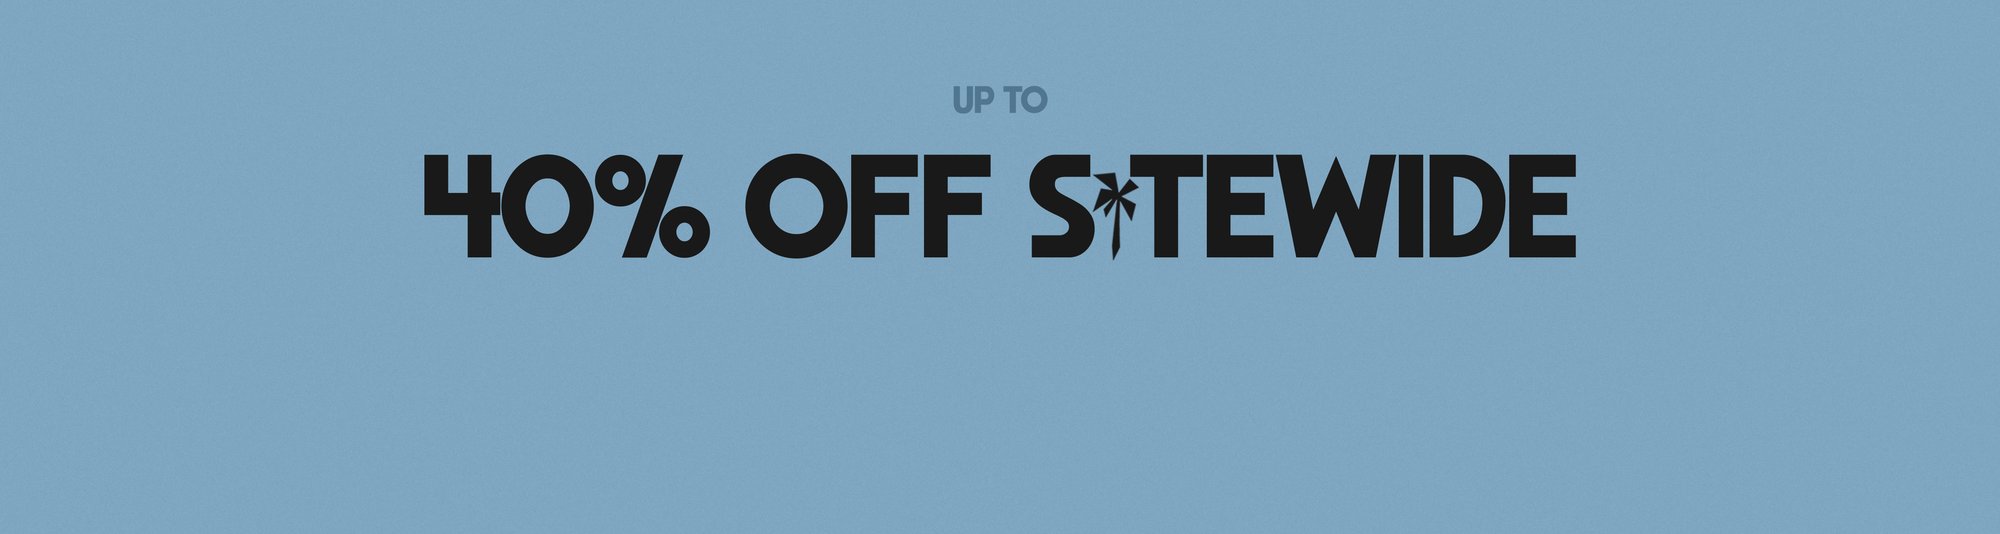 UP TO 40% OFF SITEWIDE